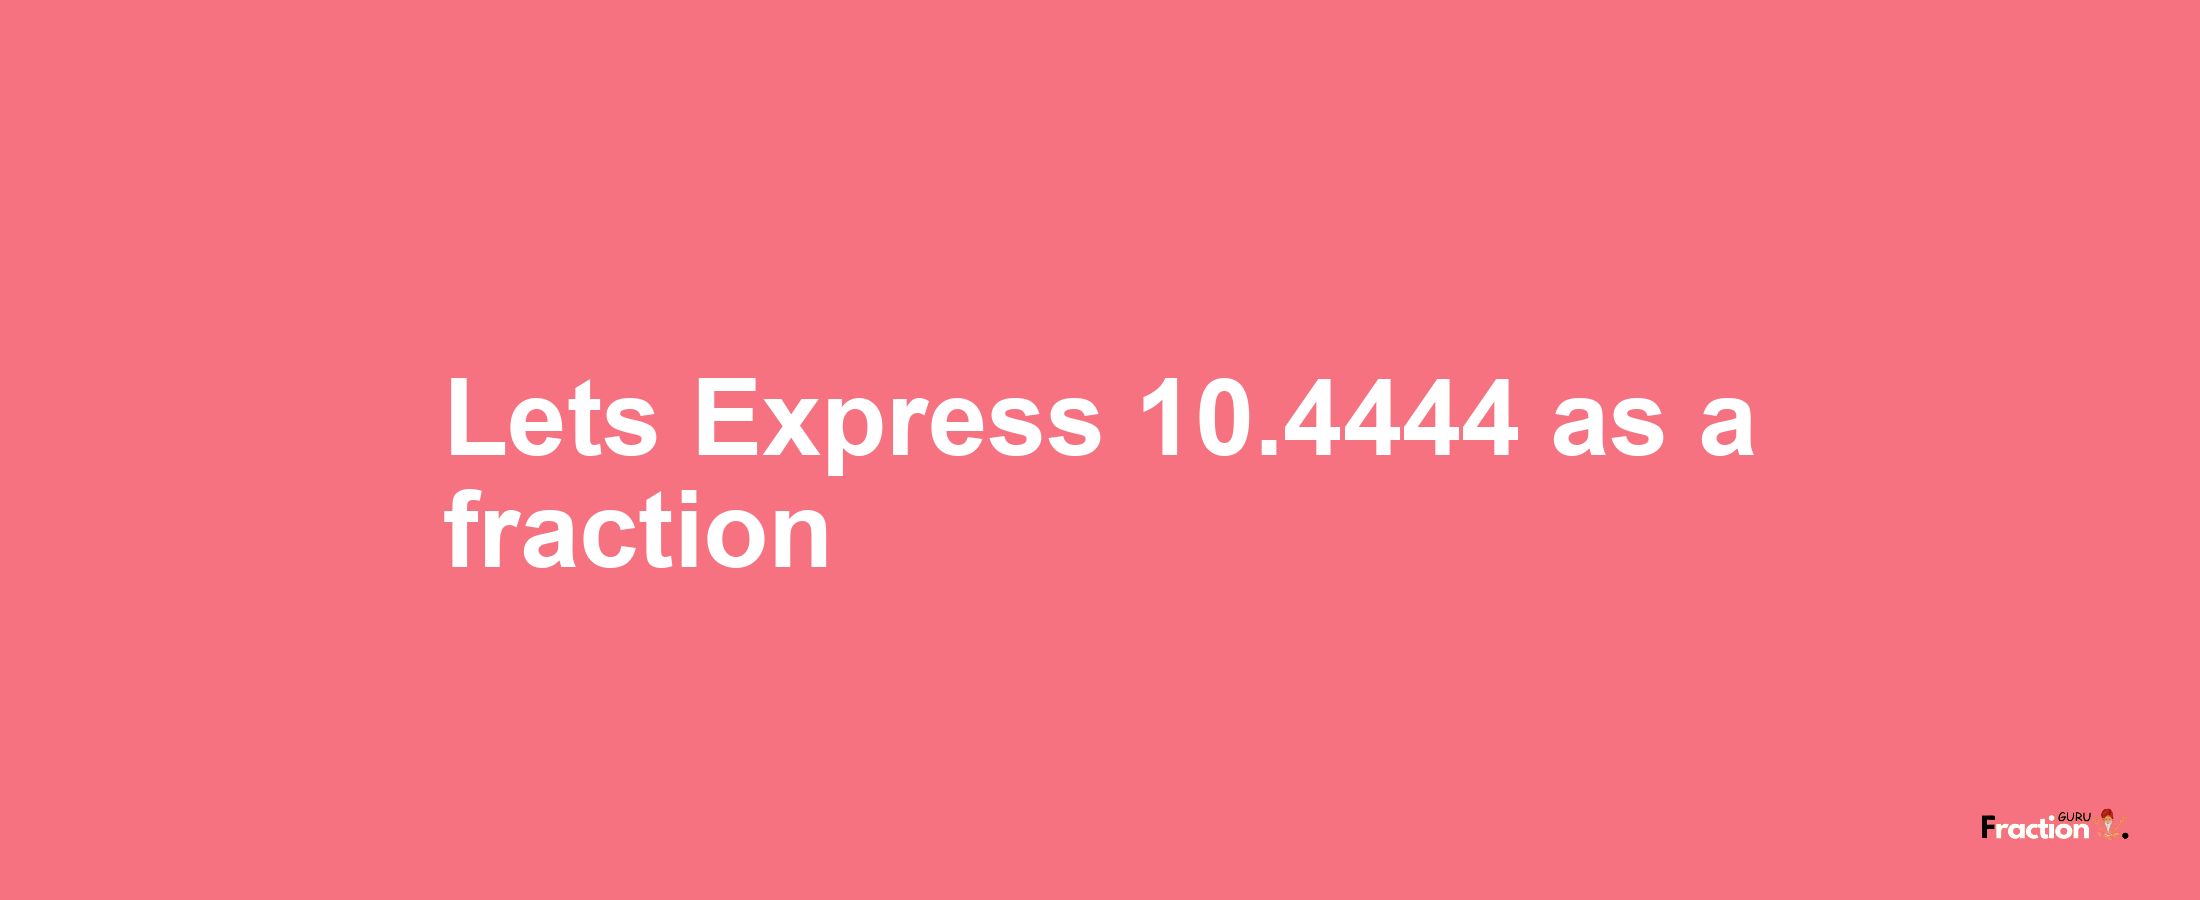 Lets Express 10.4444 as afraction